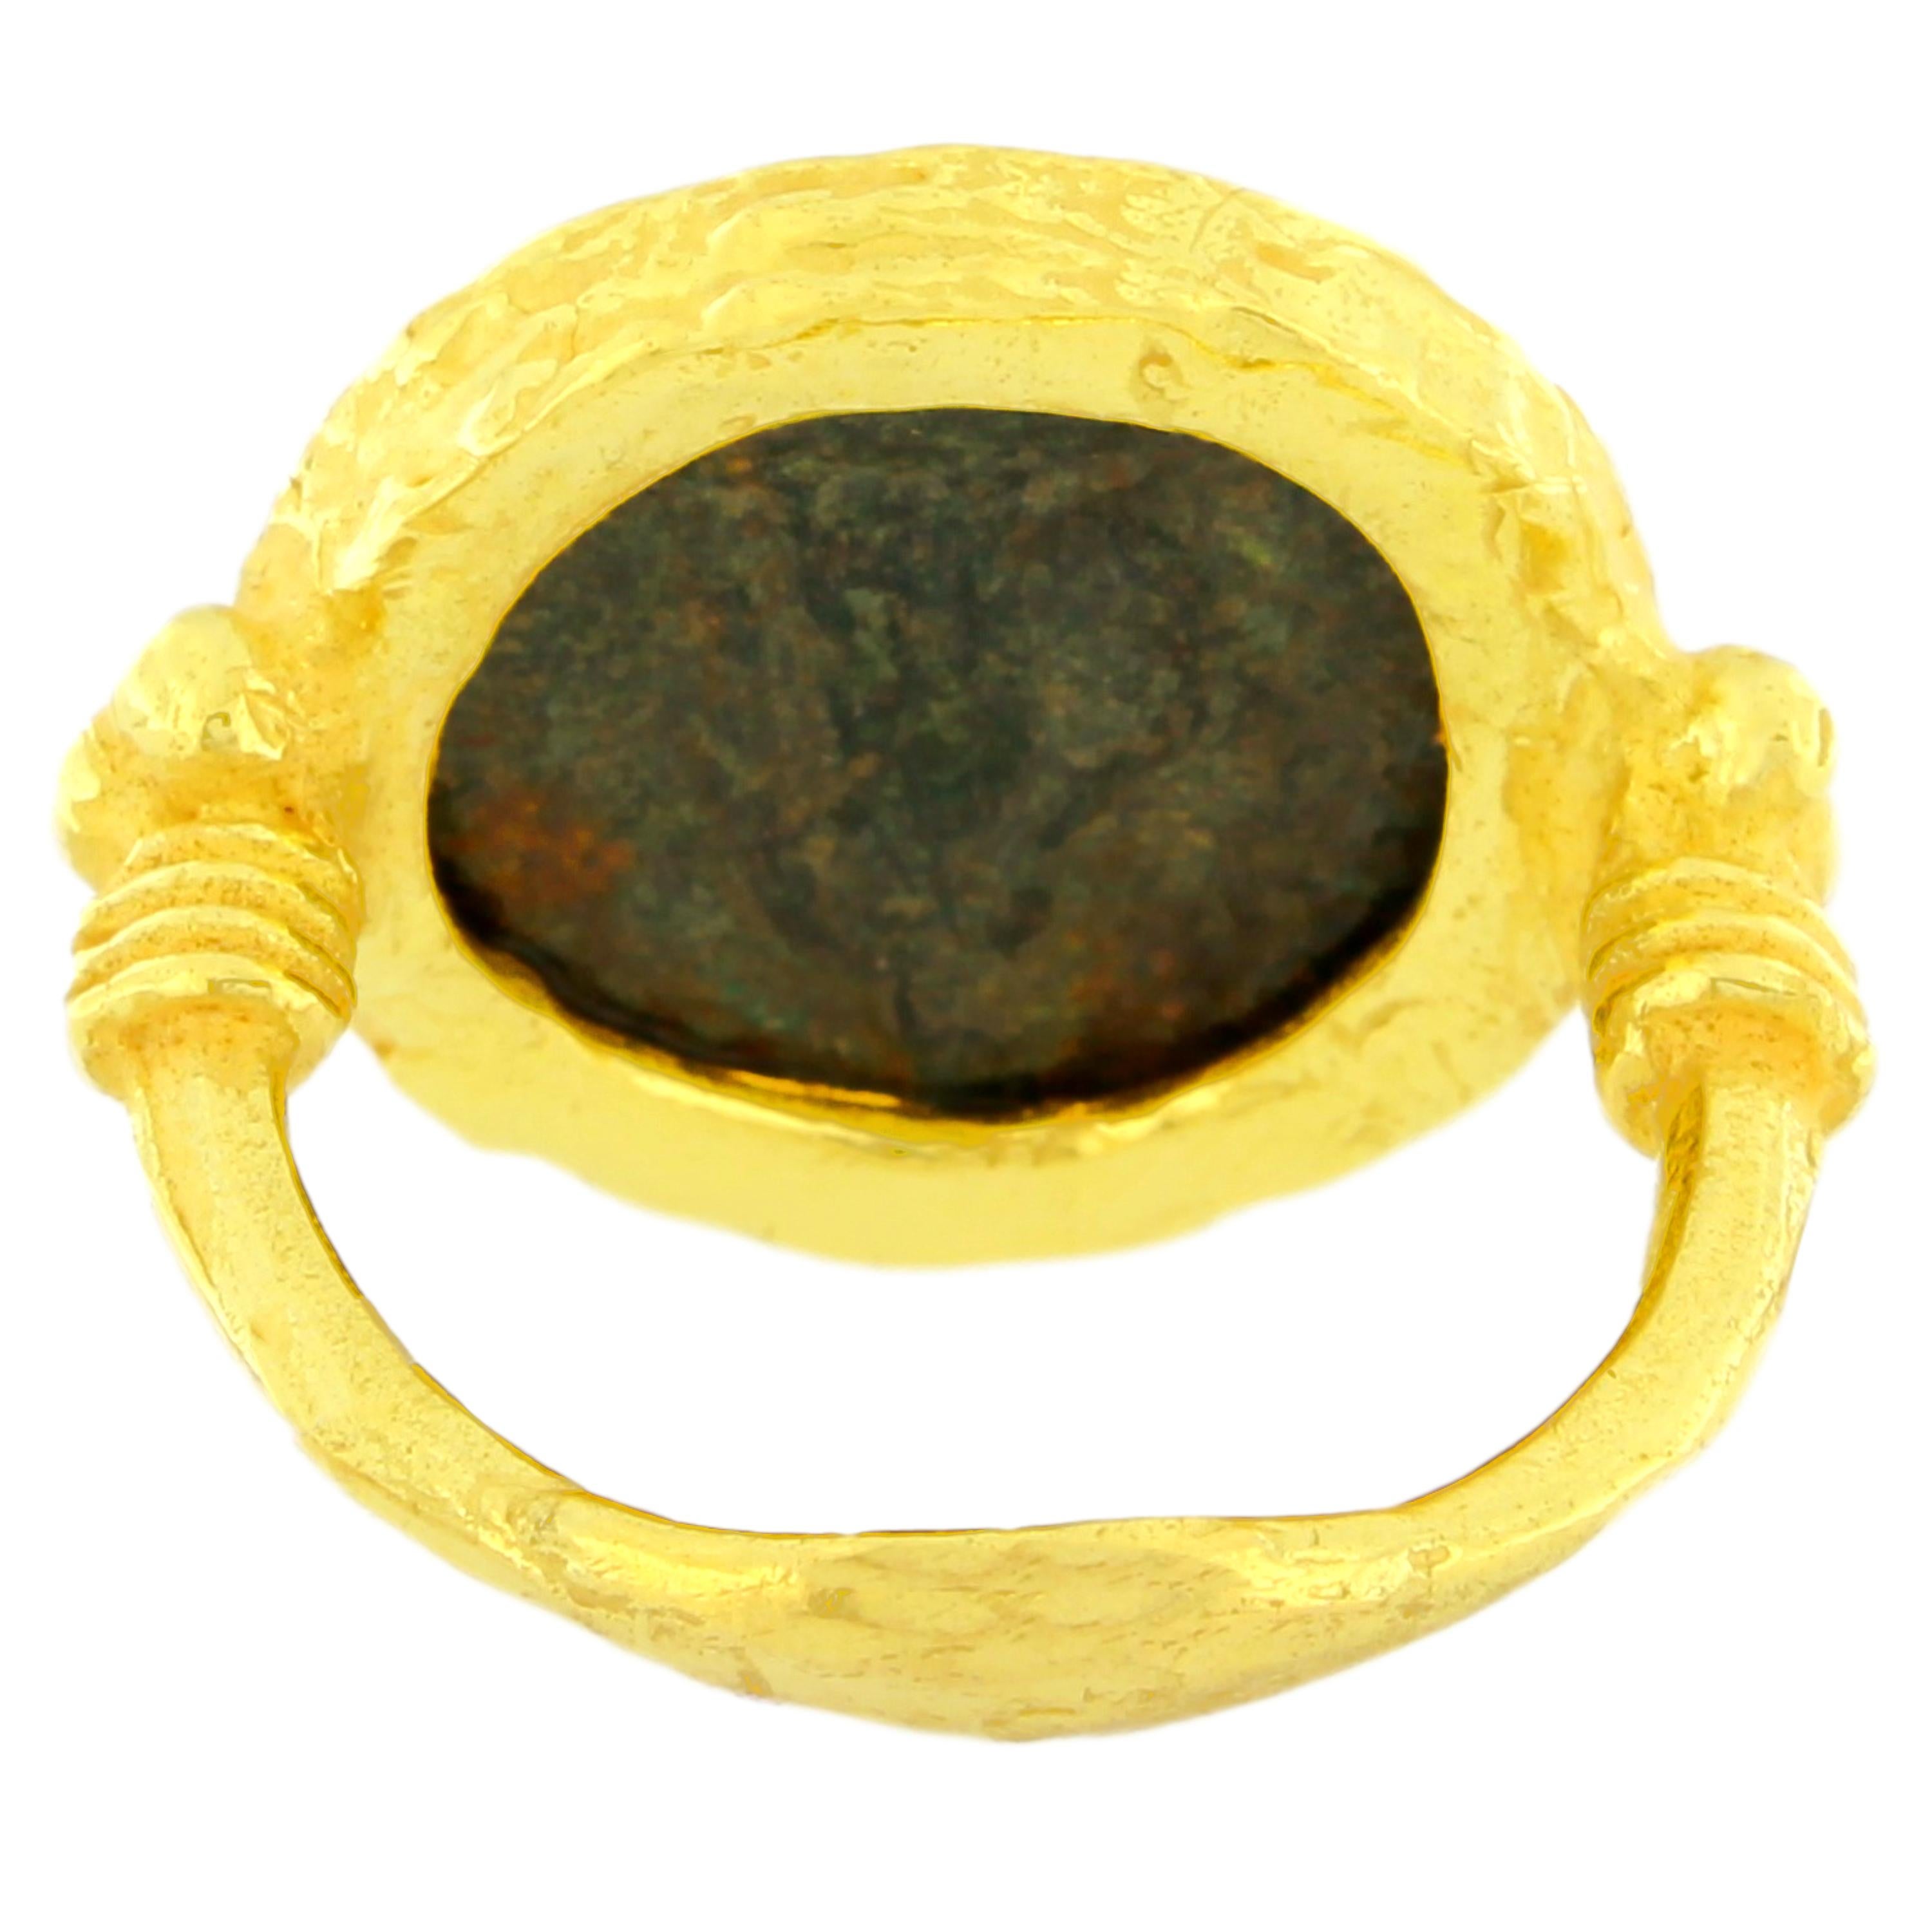 Sacchi Antique Roman Coin Ring 18 Karat Yellow Gold In New Condition For Sale In Rome, IT